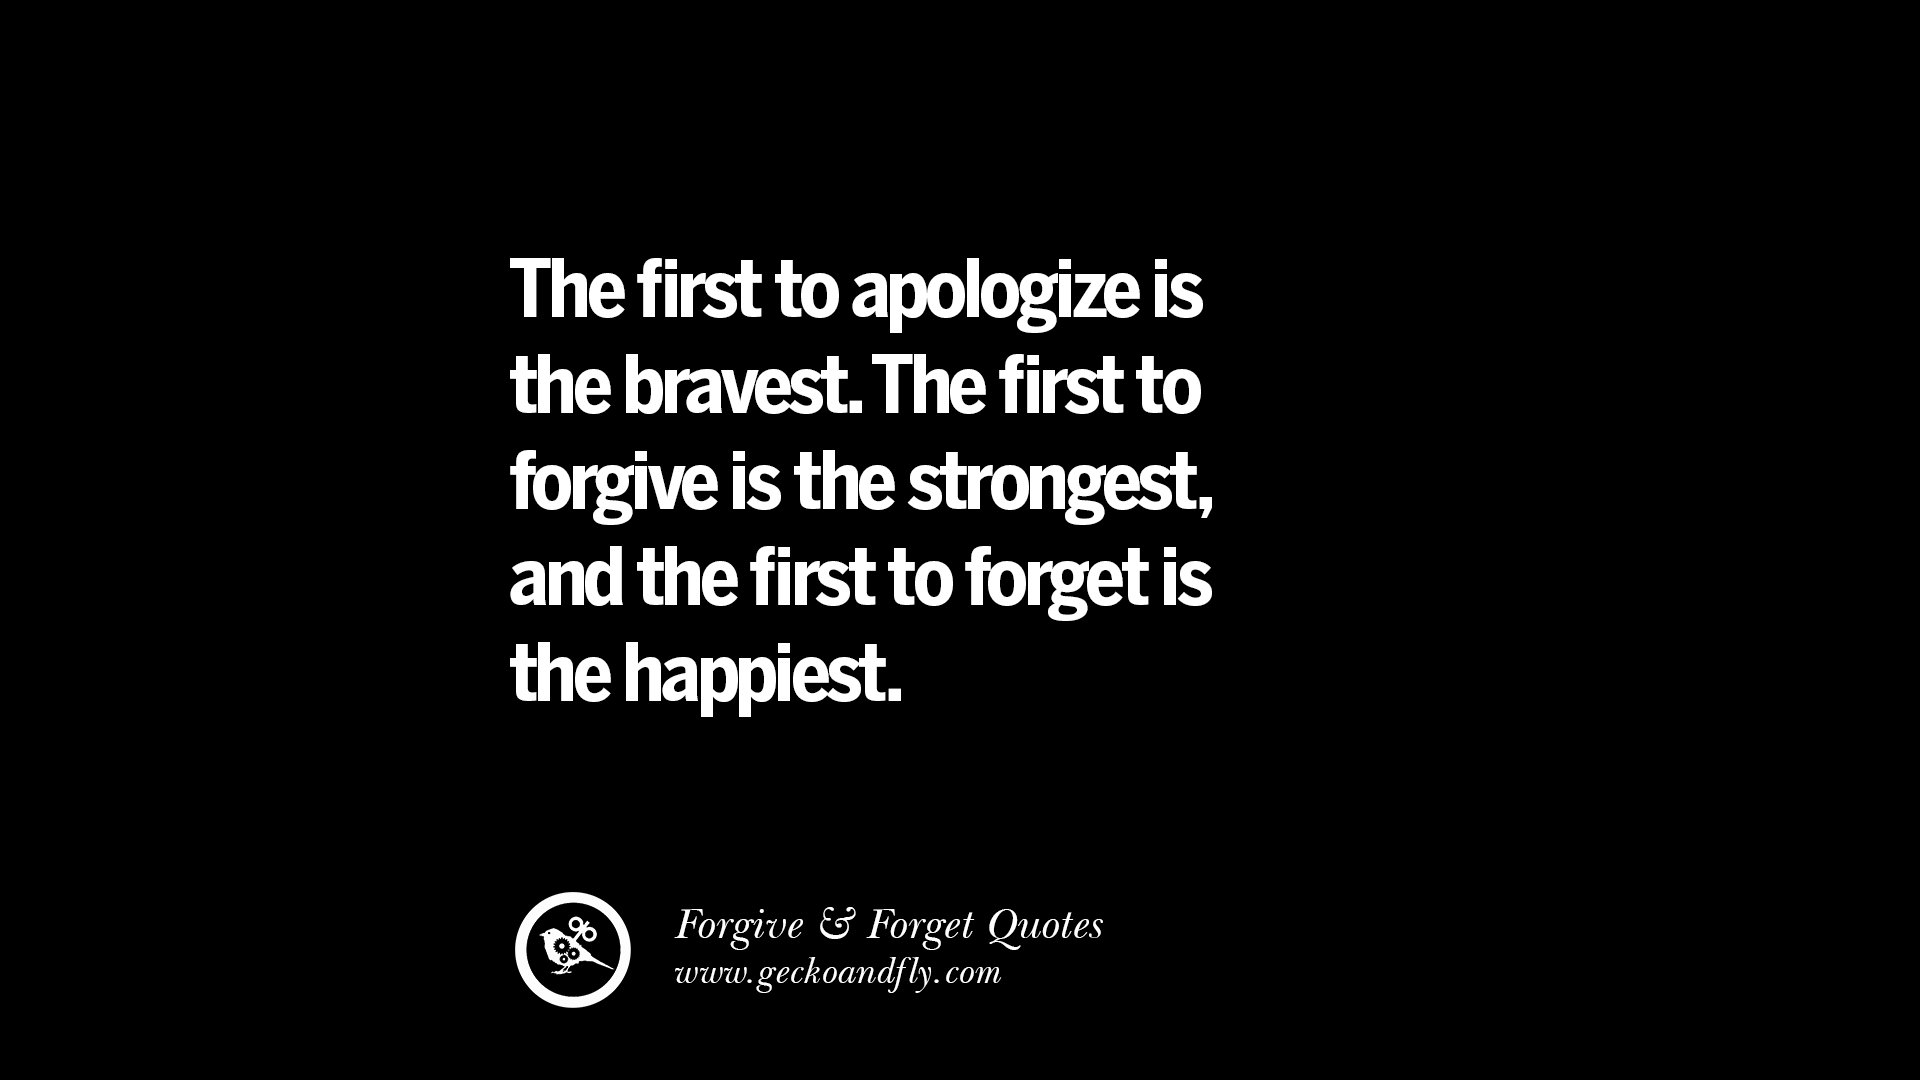 The first to apologize is the bravest The first to forgive is the strongest and the first to for is the happiest